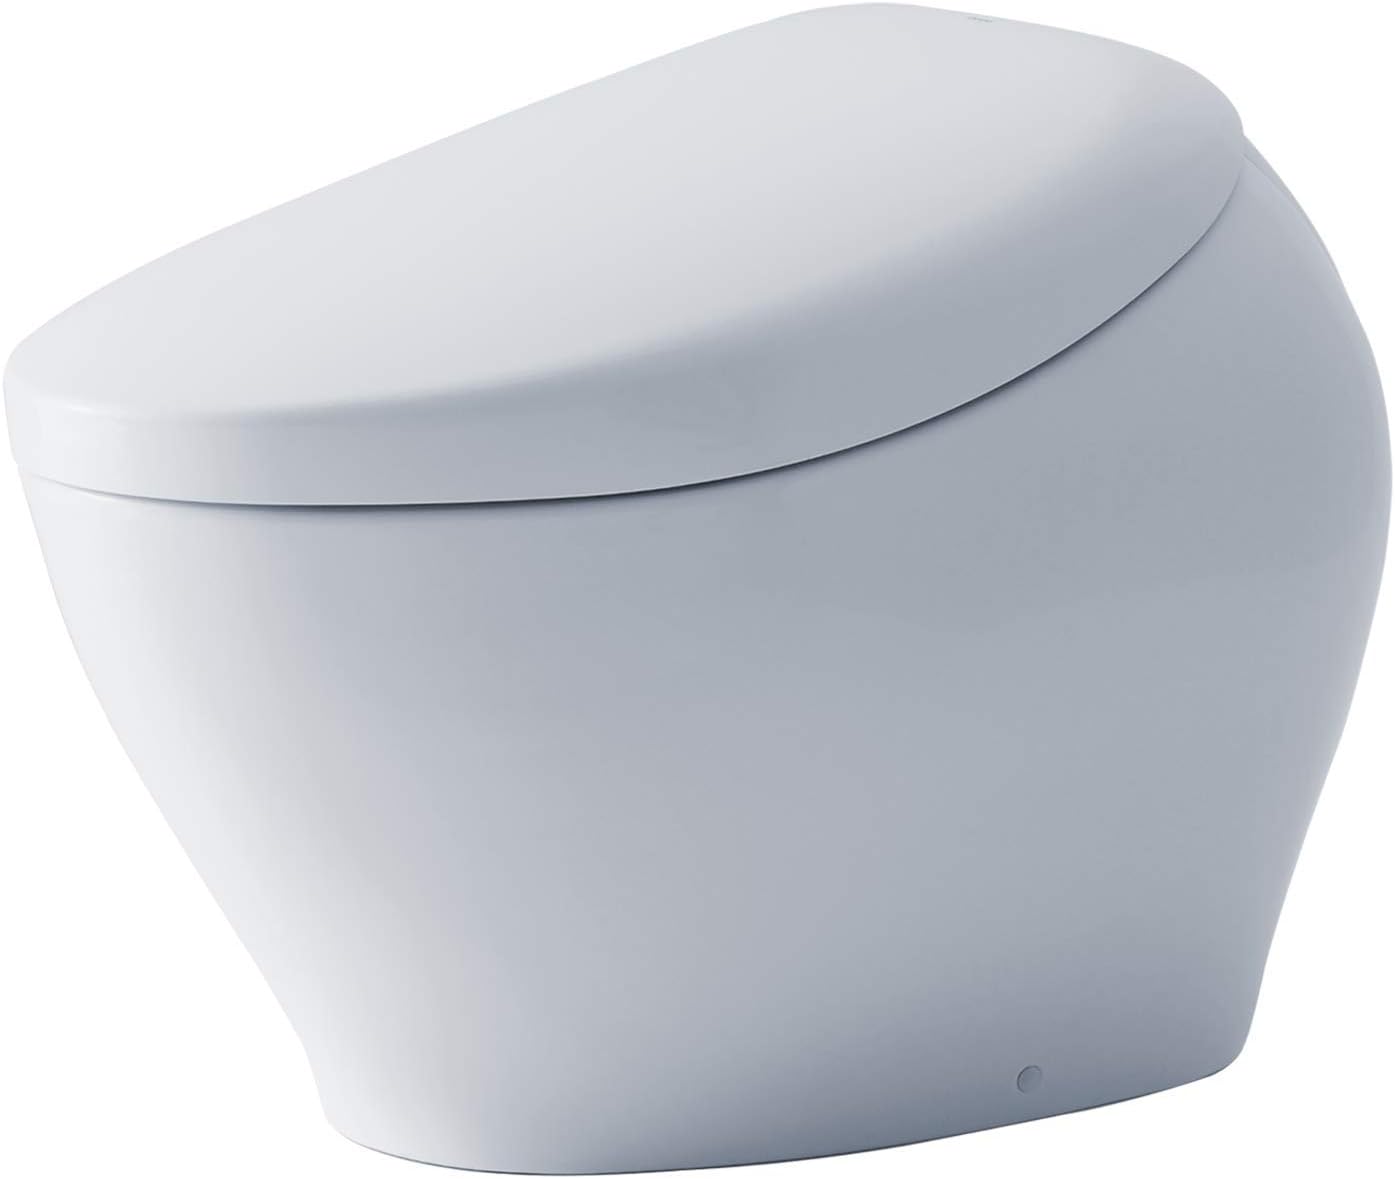 Toilet Stool Review: 5 Products Compared